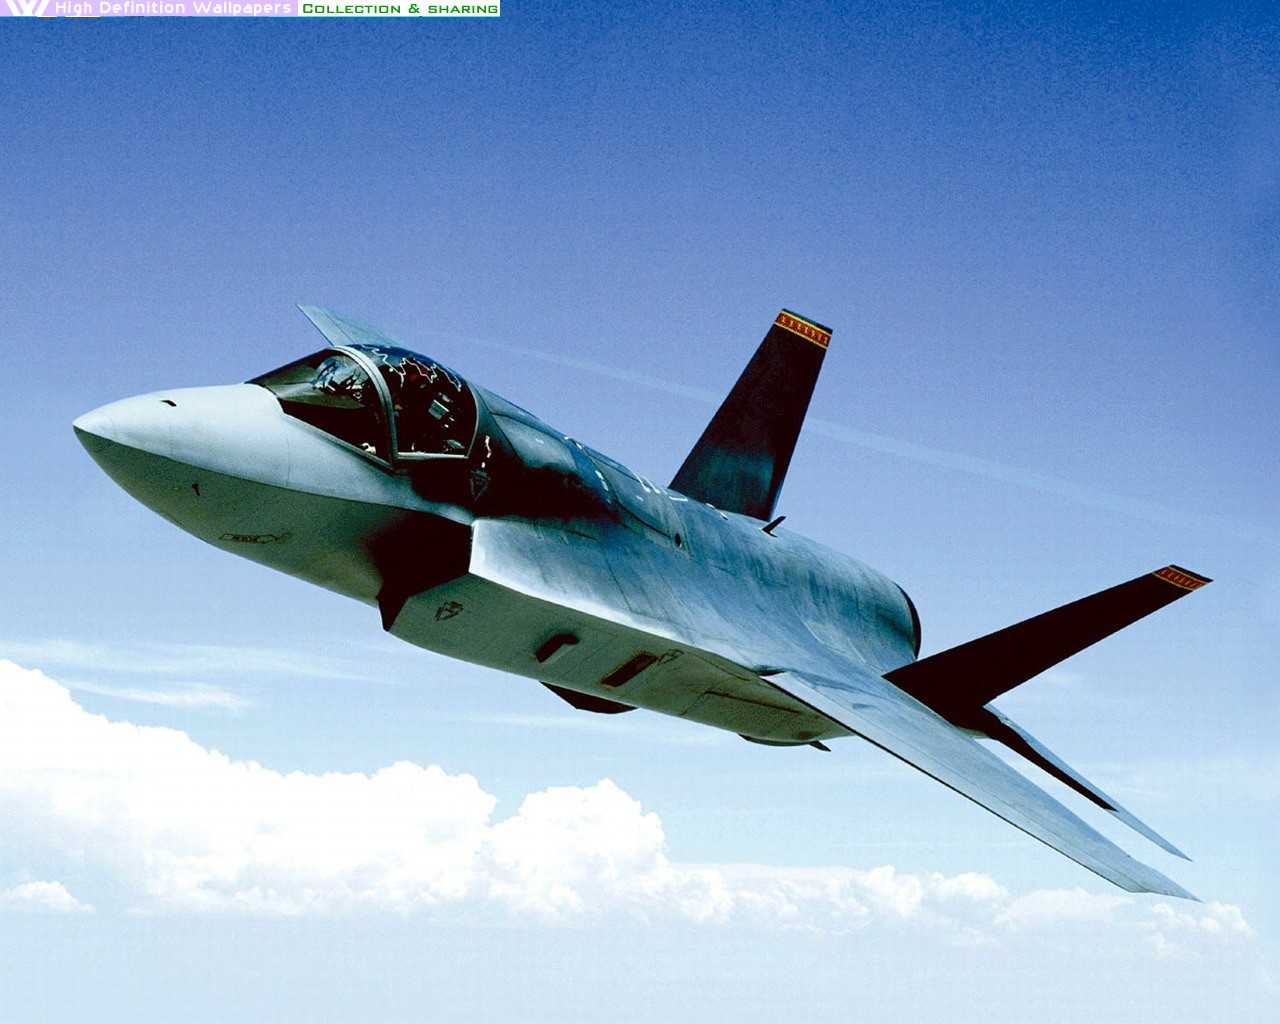 US Air Force Wallpaper 1280x1024 US Air ForceX35 fightermilitary 1280x1024